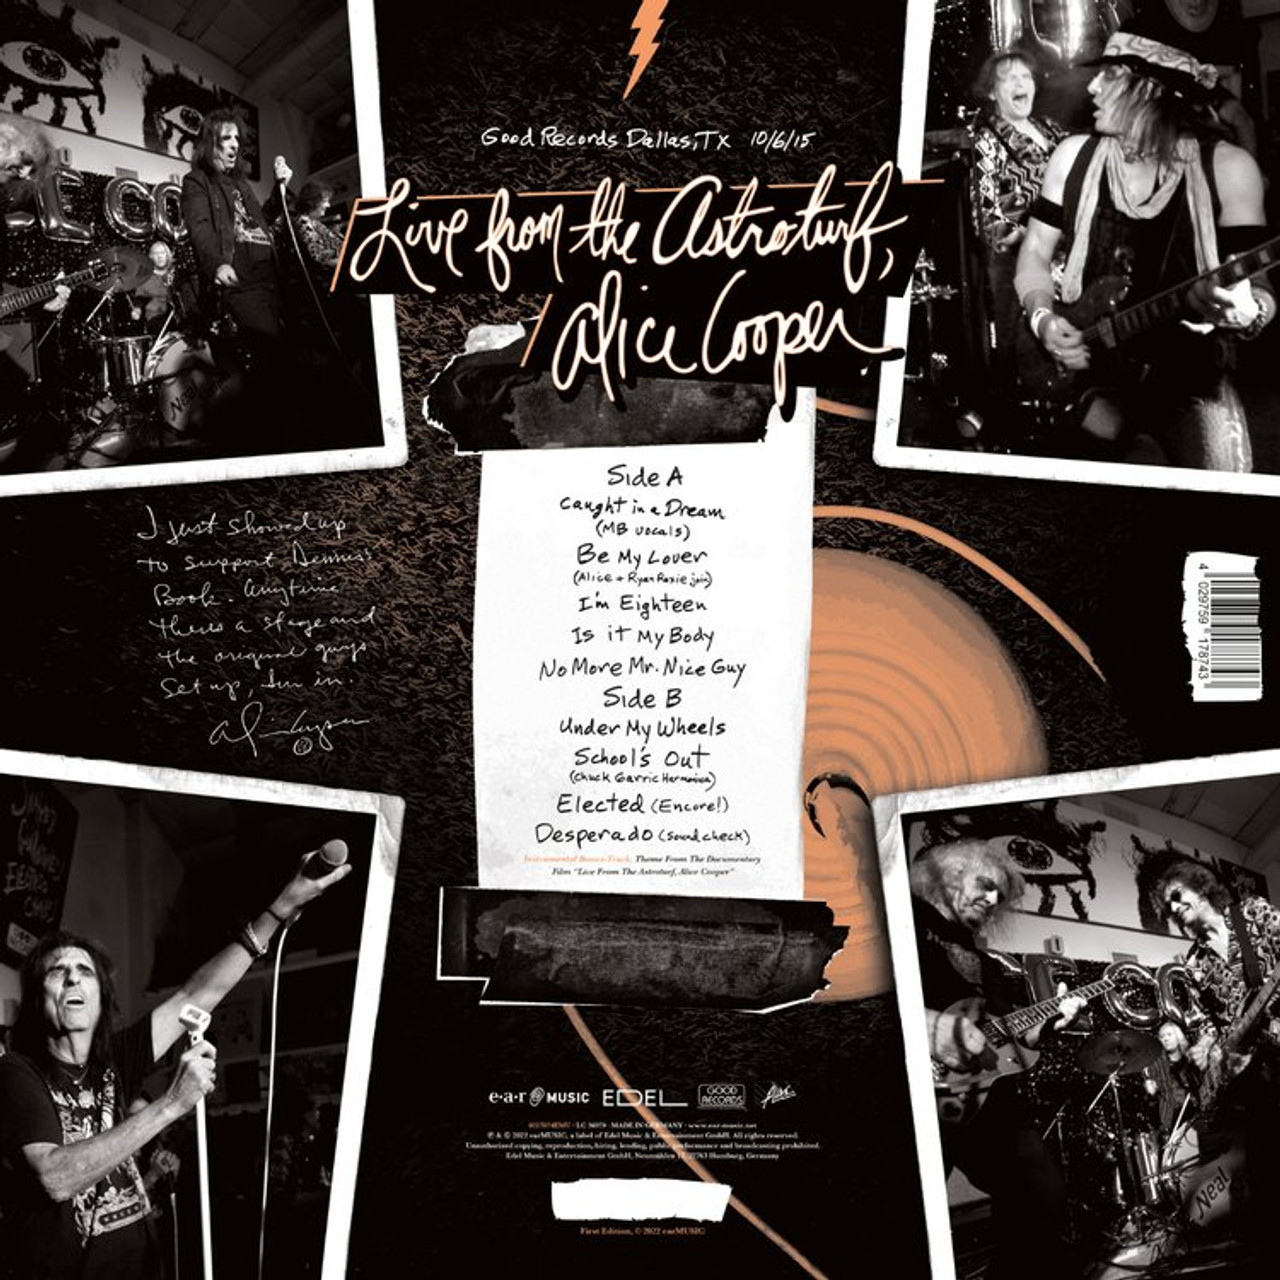 Pop-Rock Tape  Alice Cooper Band: Live From The Astroturf - Plastic Reel  1/4 19cm/s (7.5ips), LPR90, Horch House HH04.00.216, LPR90